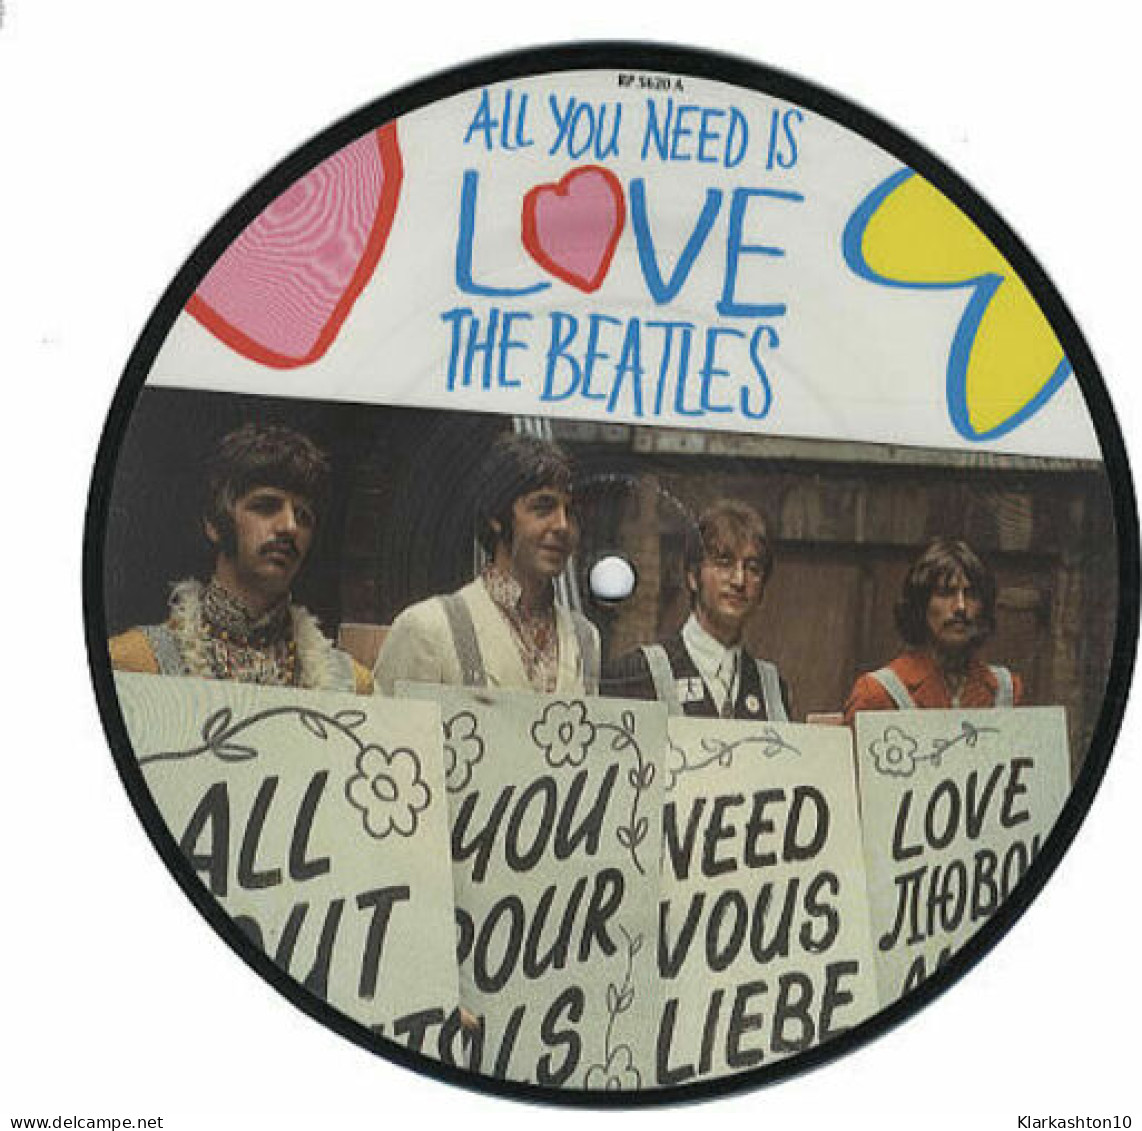 All You Need Is Love - Unclassified